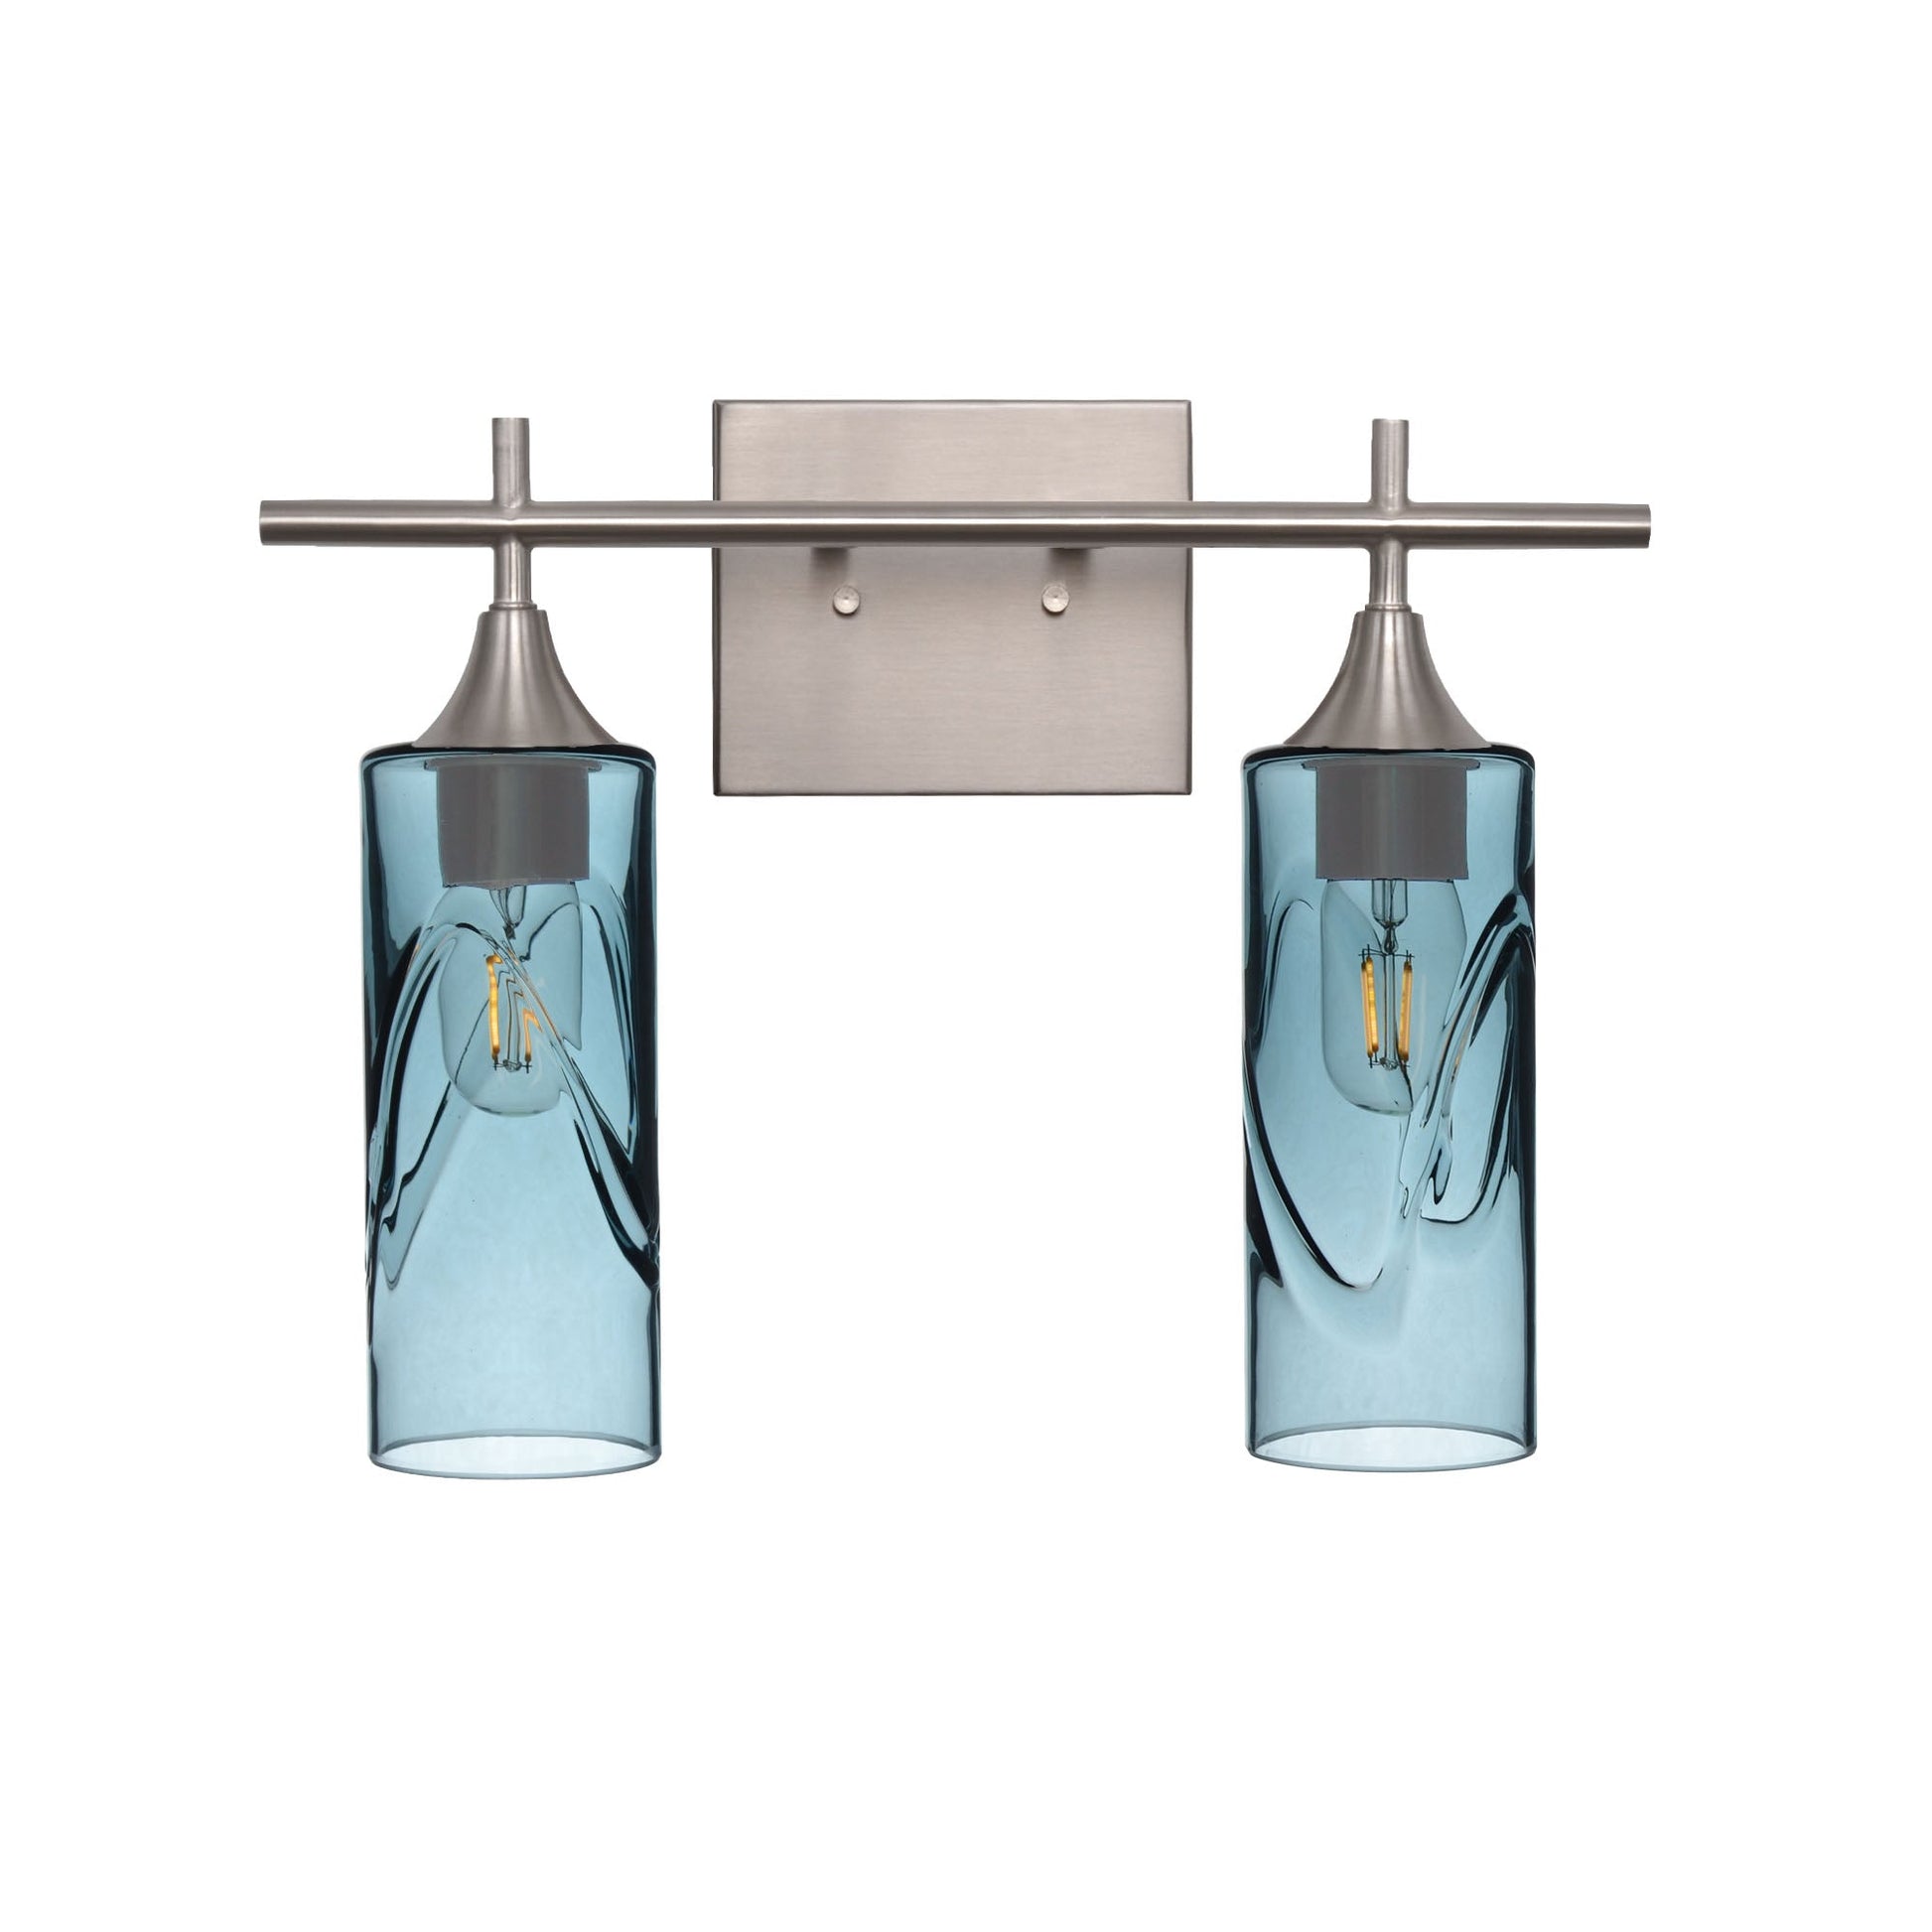 513 Swell: 2 Light Wall Vanity-Glass-Bicycle Glass Co - Hotshop-Slate Gray-Brushed Nickel-Bicycle Glass Co